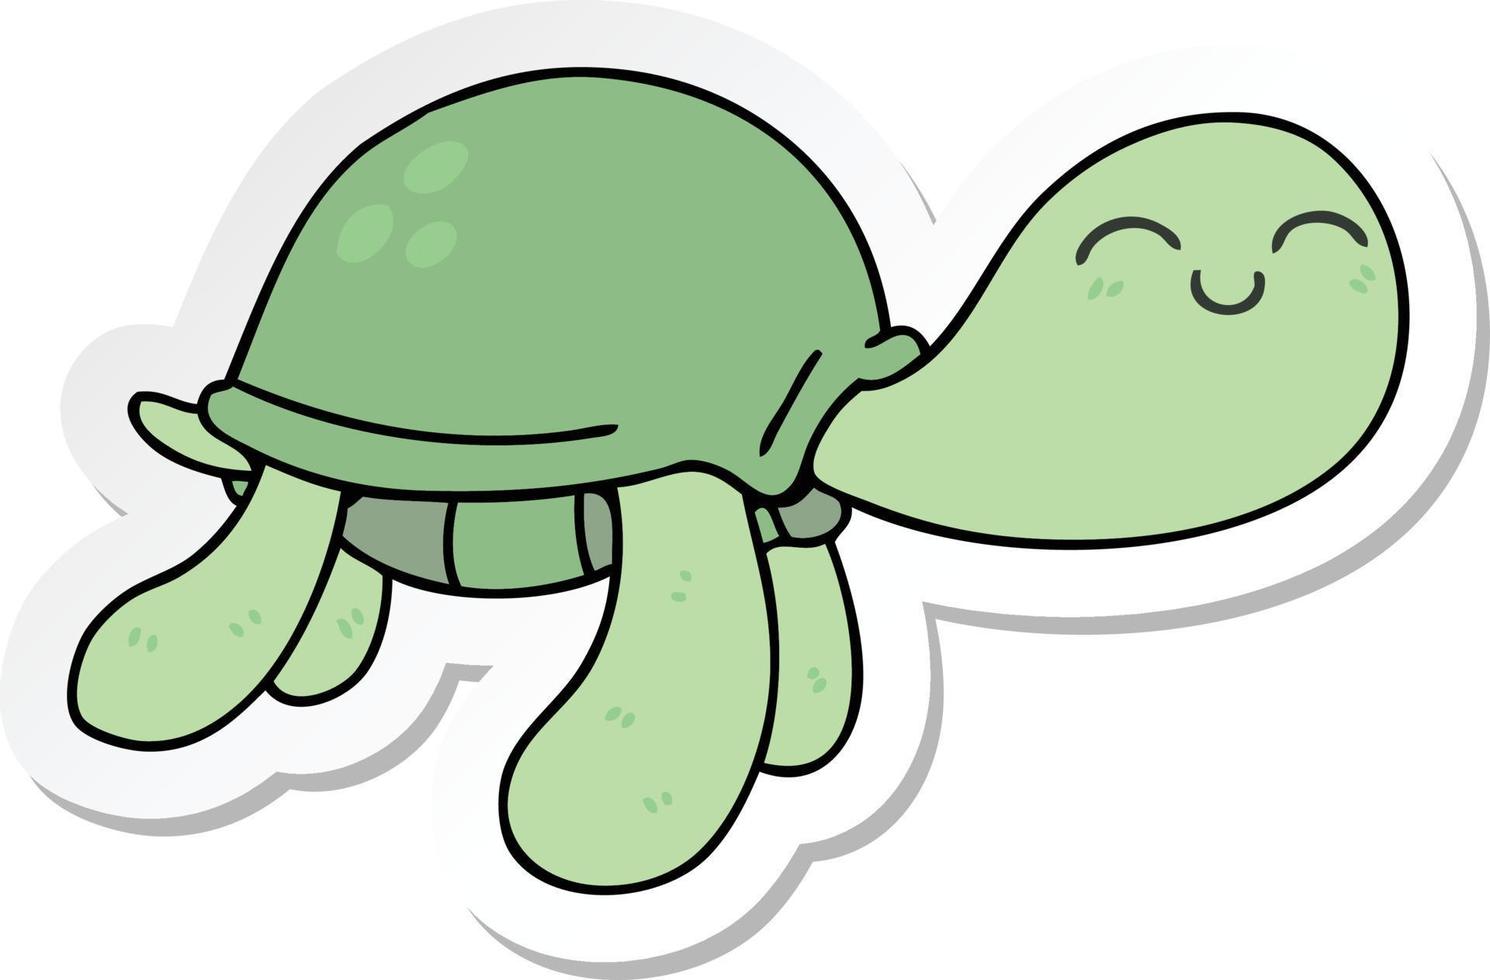 sticker of a quirky hand drawn cartoon turtle vector